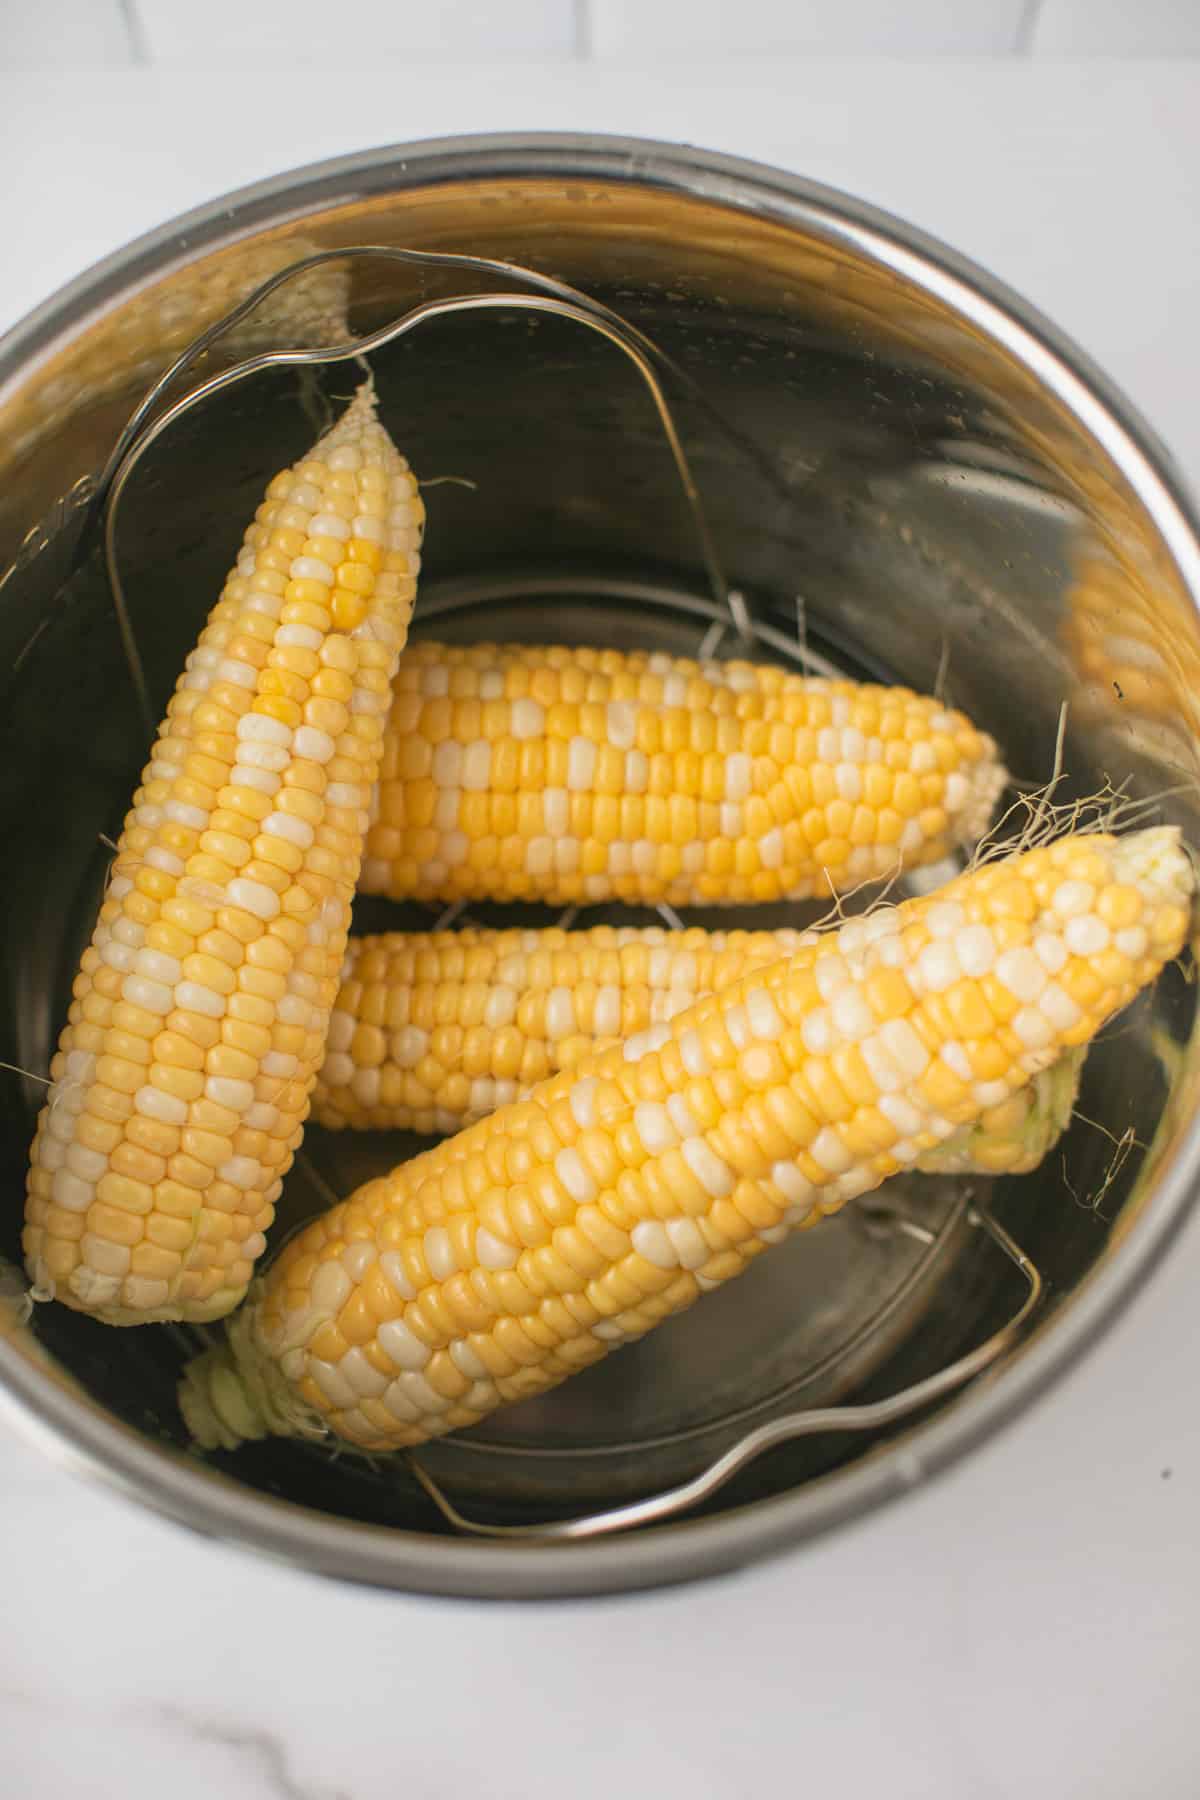 four pieces of corn on the cob inside an instant pot pressure cooker.